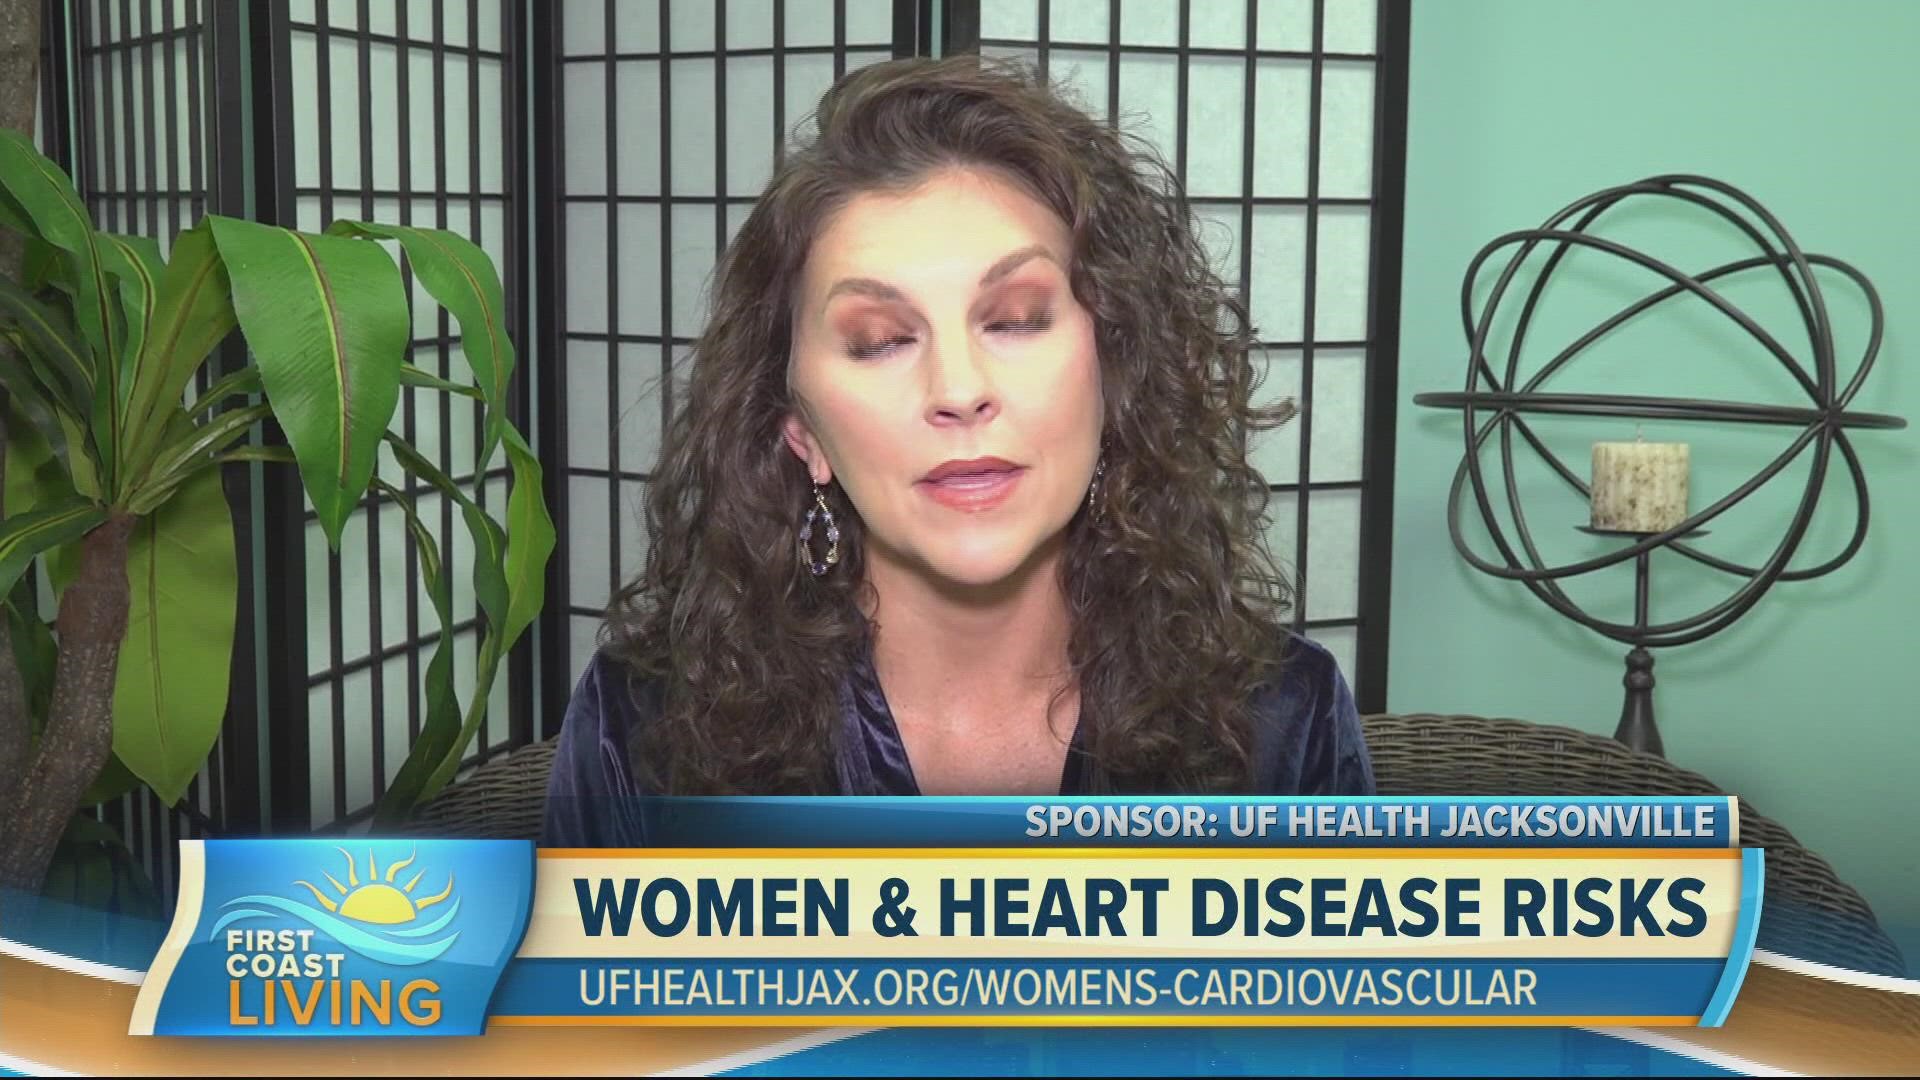 Dr. Gladys Velarde of UF Health Jacksonville shares misconceptions and risk factors, as well as practical steps you can take to reduce your risk.